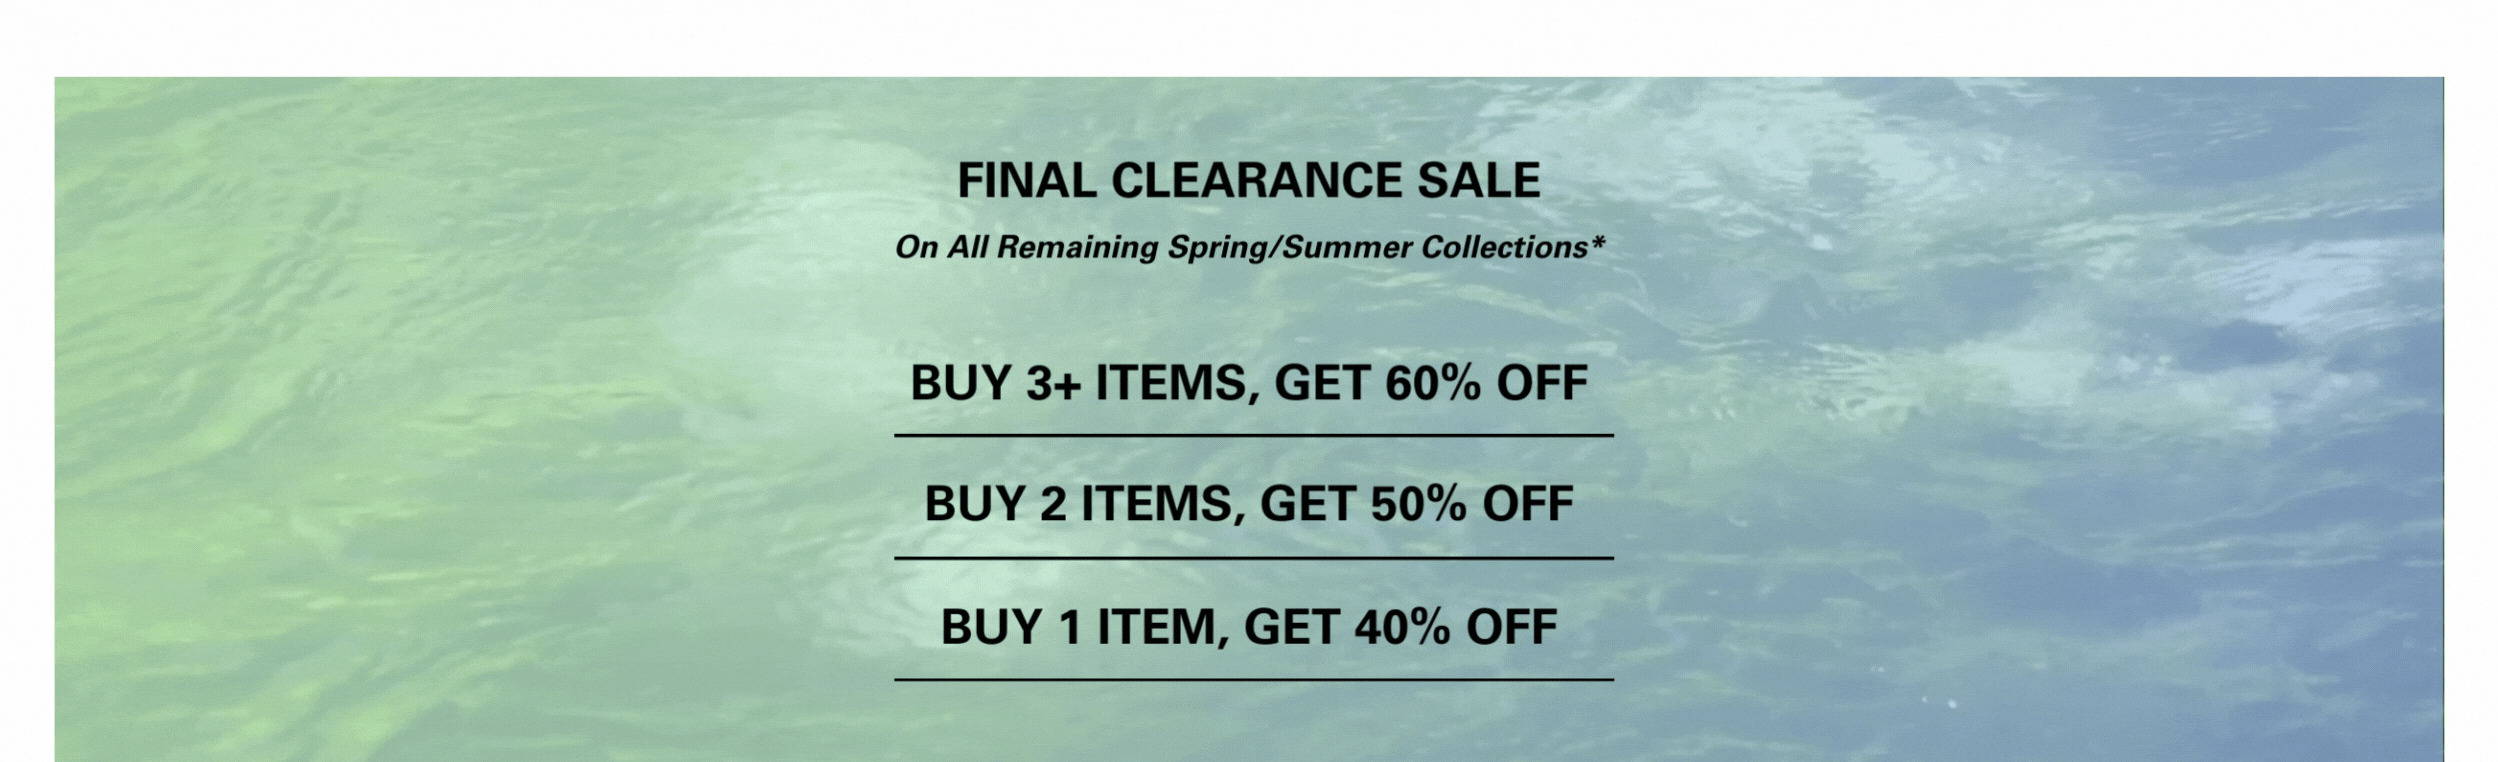 Final Clearance - up to 60% Off